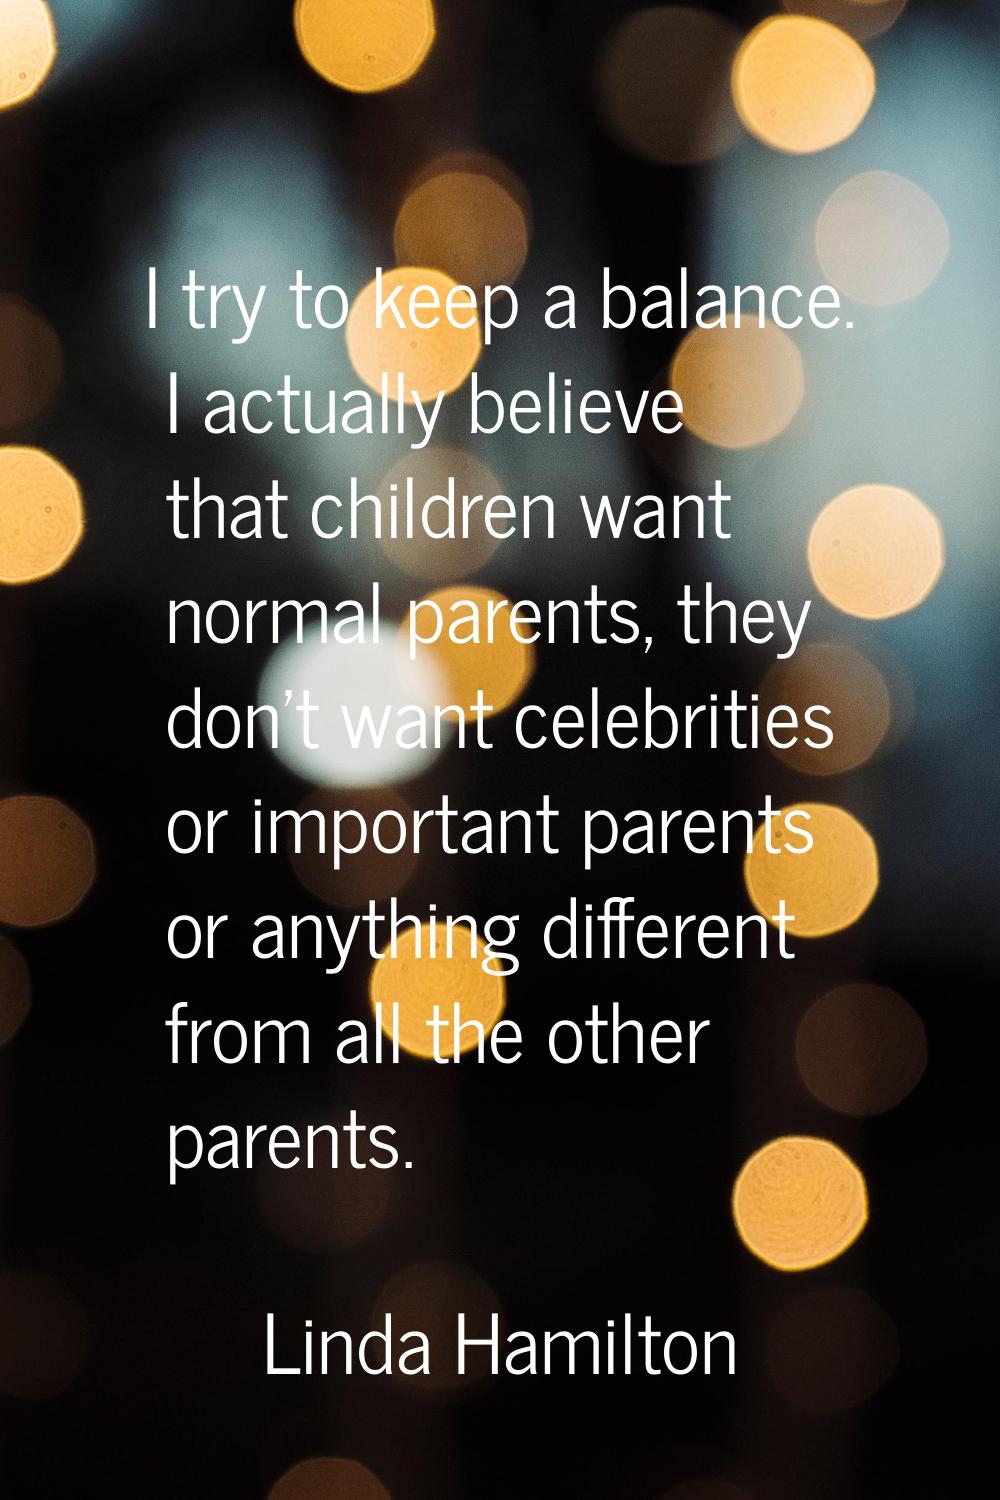 I try to keep a balance. I actually believe that children want normal parents, they don't want cele